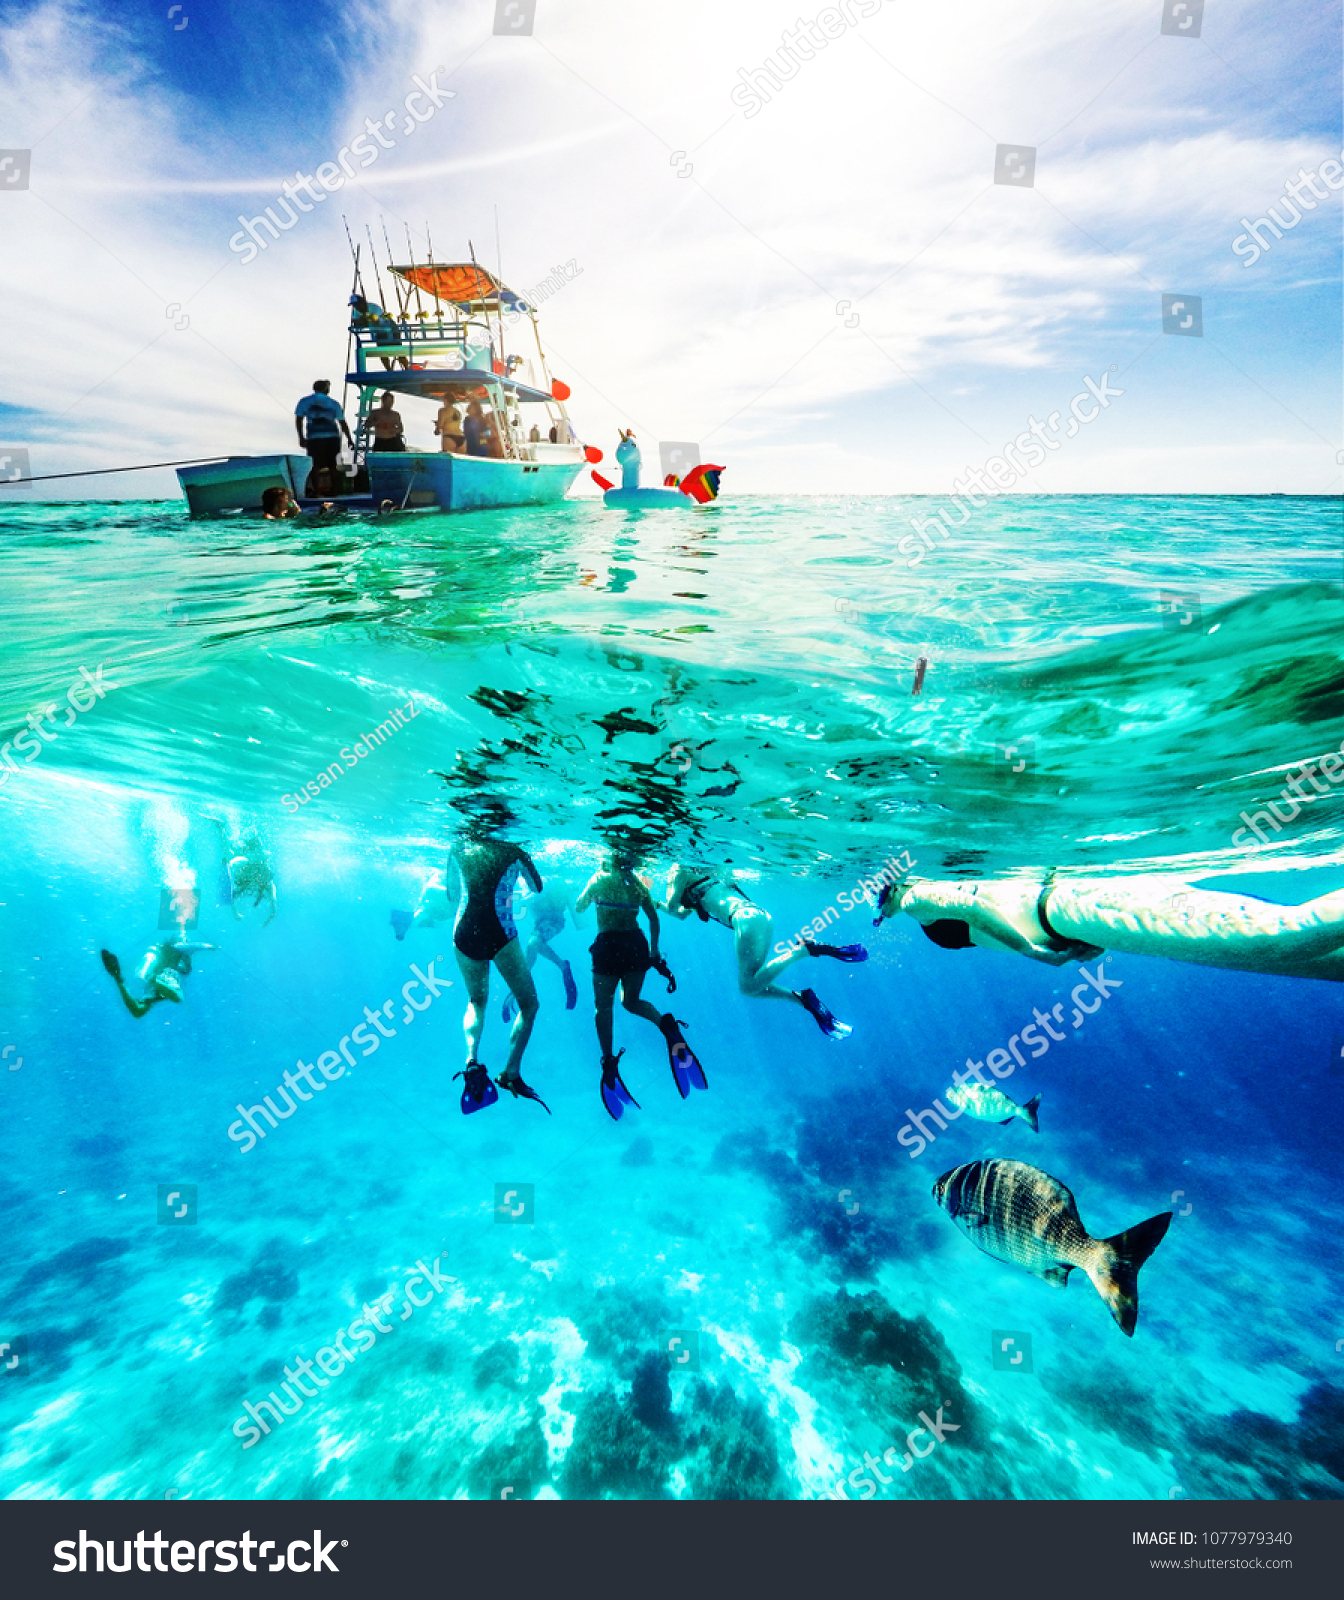 Group of friends on a Carribean Sea adventure with party boat, snorkeling and scuba diving #1077979340